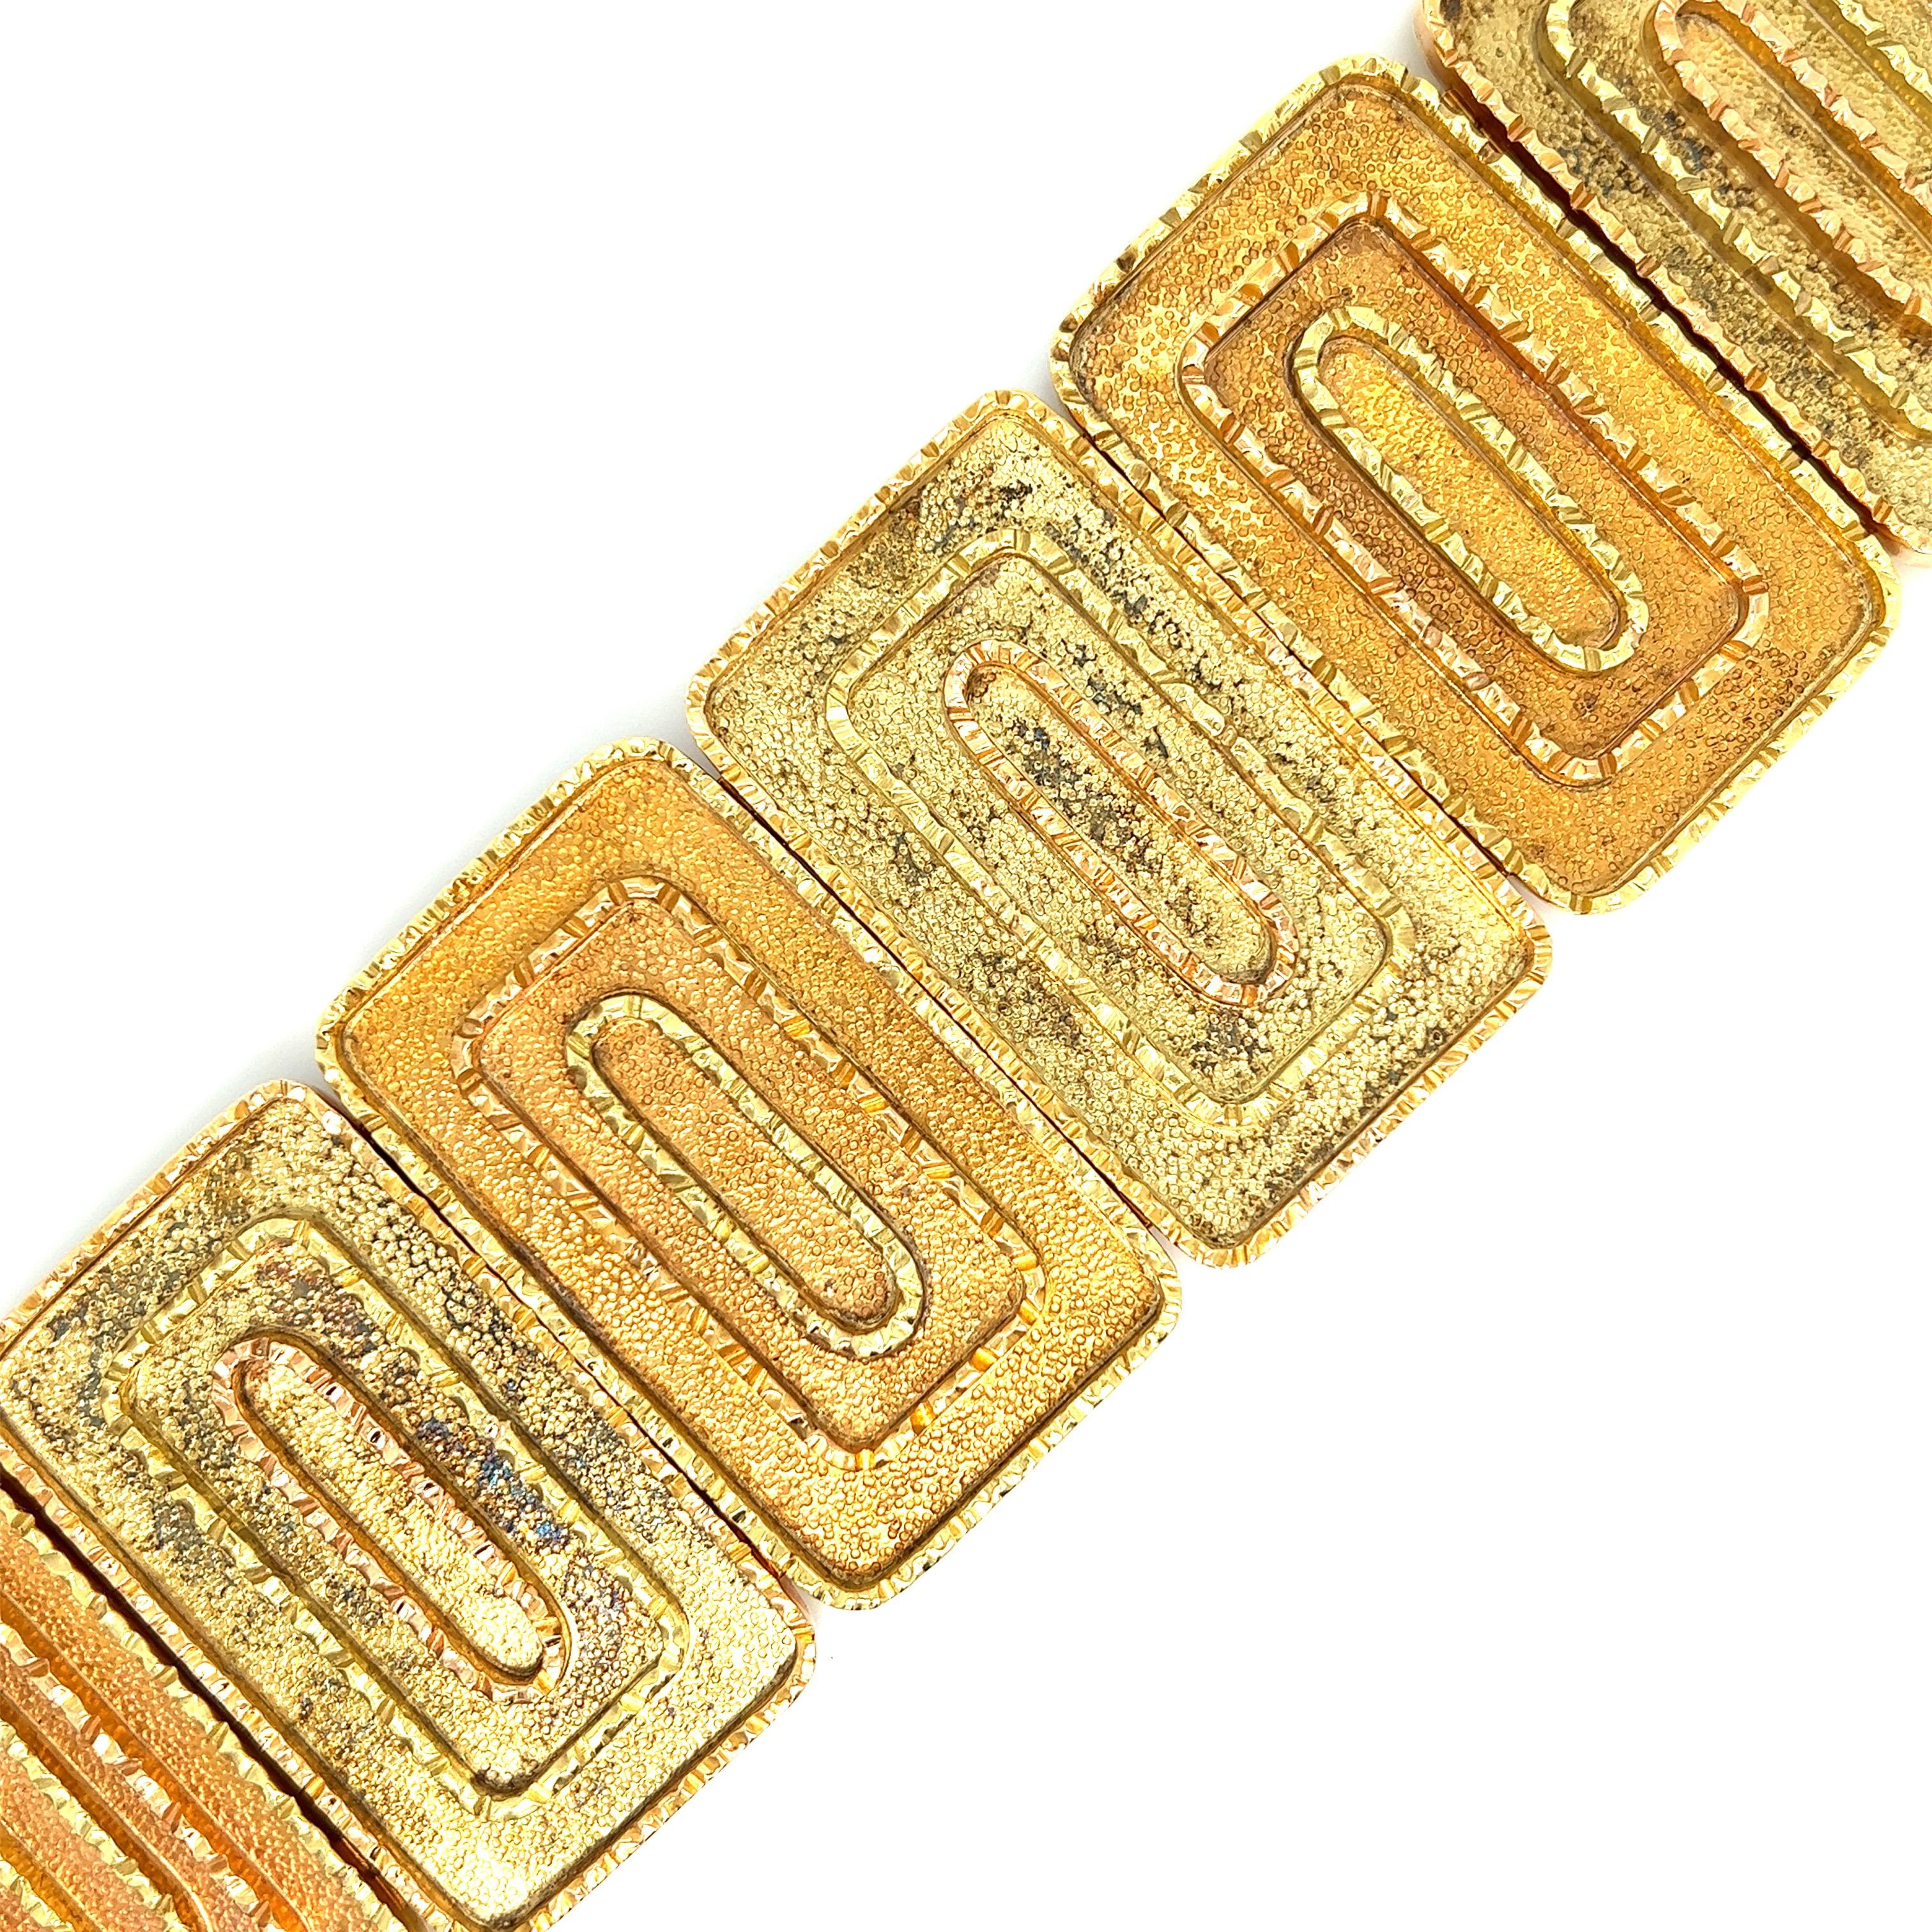 Two-tone rectangular gold panels Bracelet 

18 karat yellow gold and rose gold; marked 18kt

Size: width 1.88 inch, length 7.13 inches
Total weight: 218.6 grams